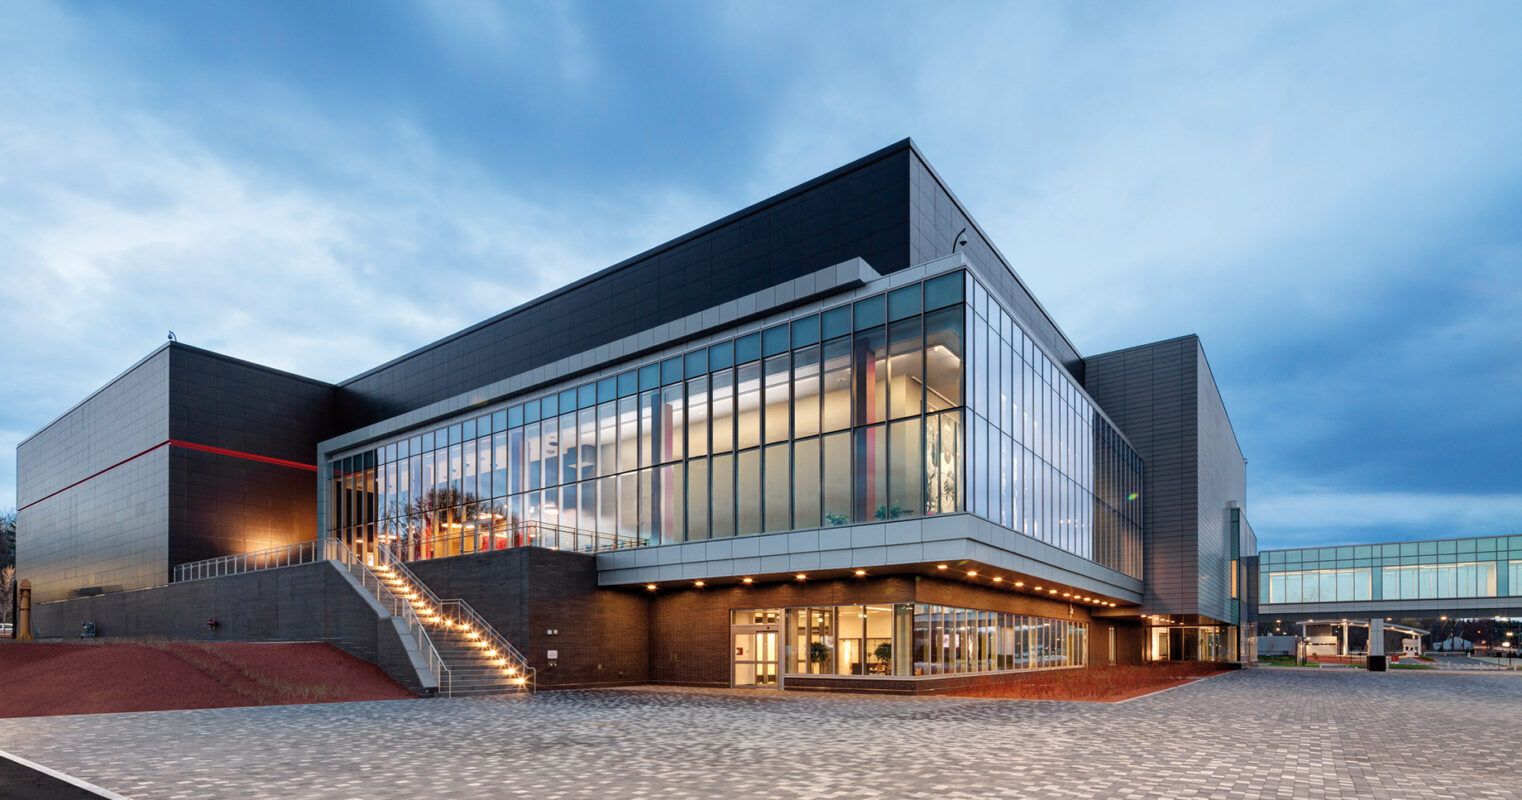 Modern cultural center building illuminated at dusk, showcasing contemporary architecture with a spacious plaza.